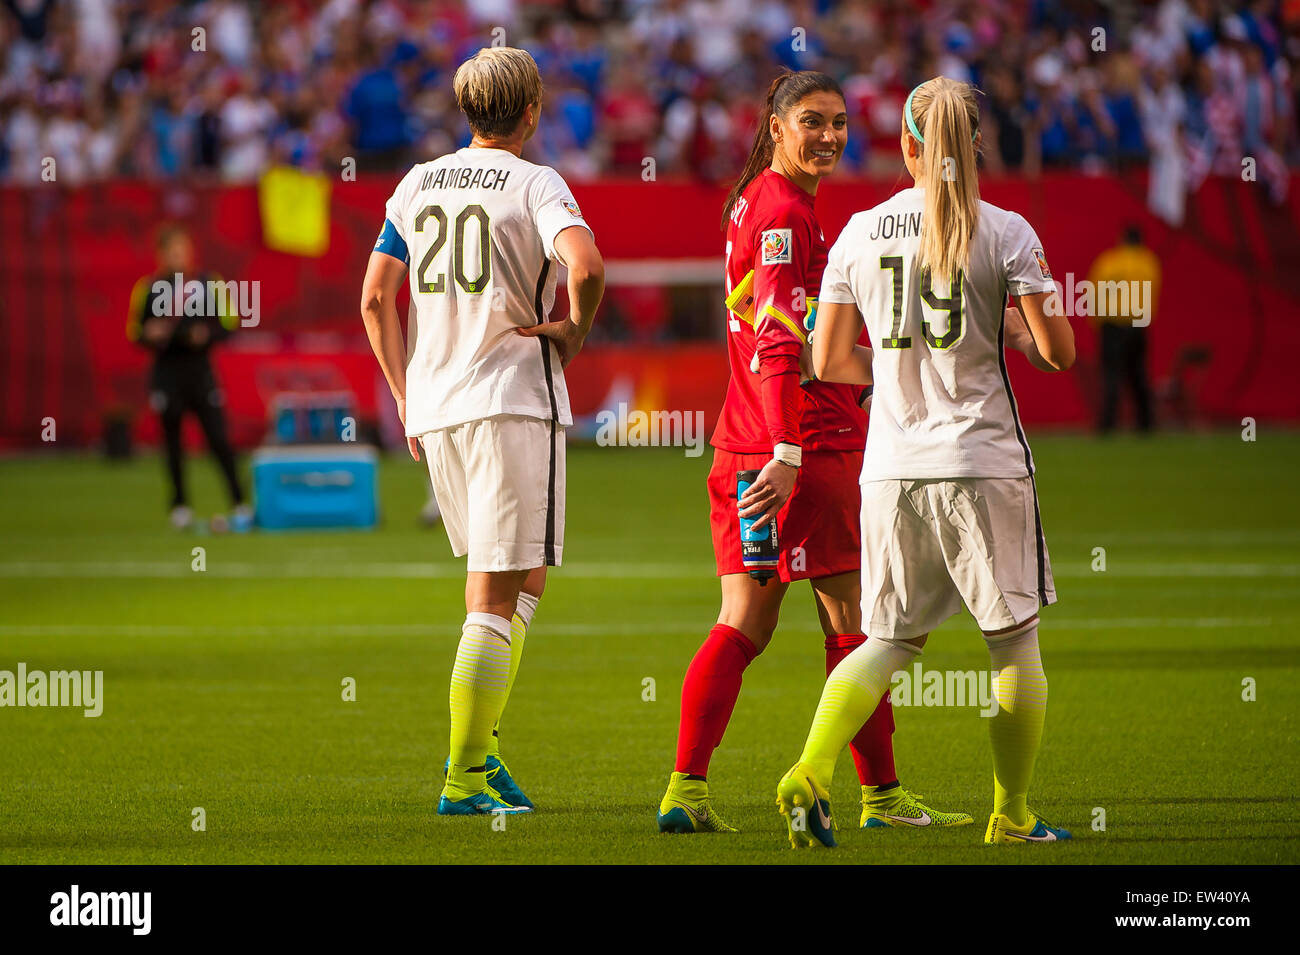 Vancouver, Canada. 16th June, 2015. United States goalkeeper Hope Solo (#1) and United States defender Julie Johnston (#19) following their opening round match between Nigeria and the United States at the FIFA Women's World Cup Canada 2015 at BC Place Stadium. The United States won the match 1-0. Credit:  Matt Jacques/Alamy Live News Stock Photo